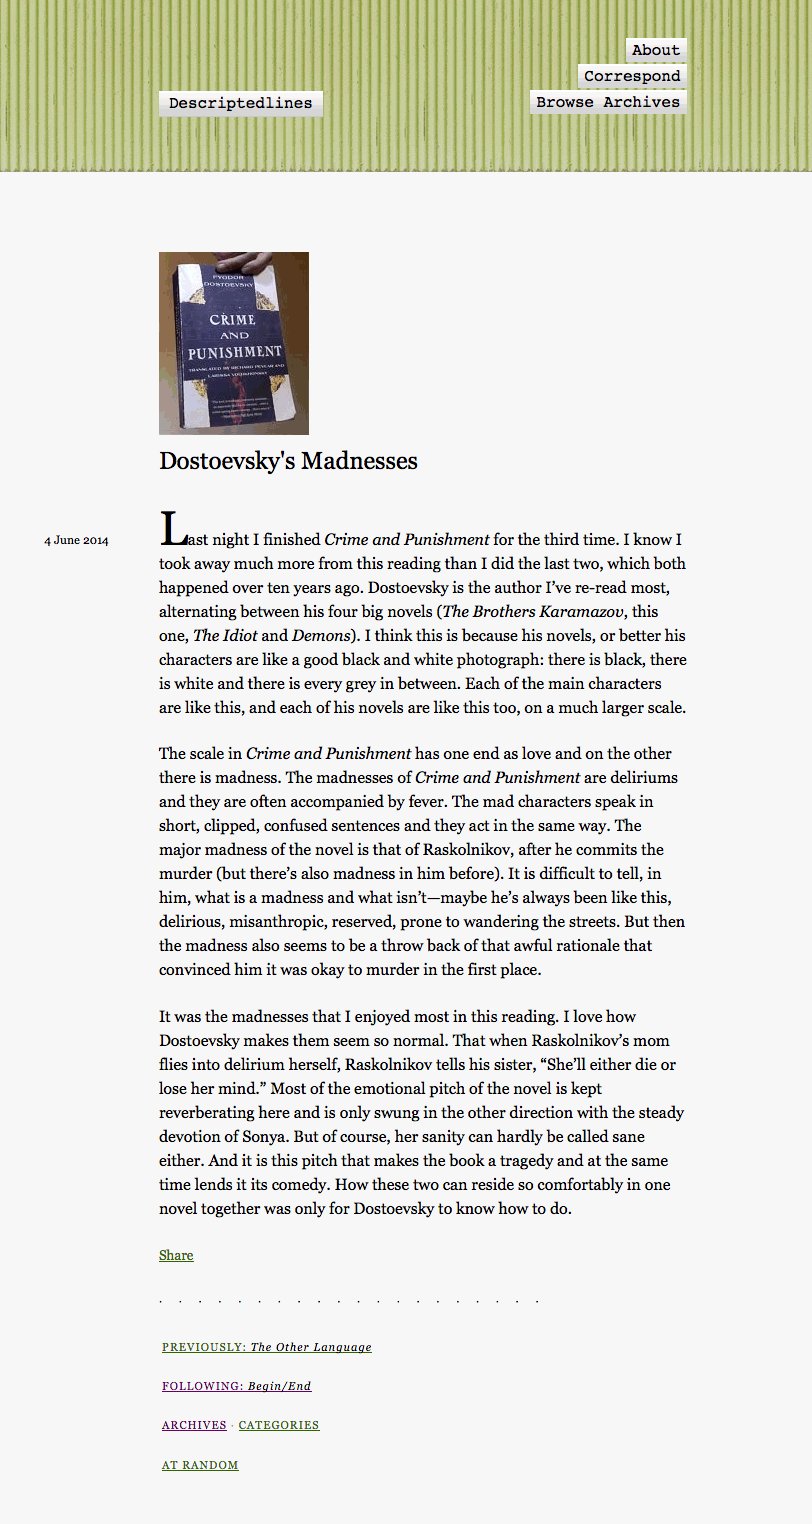 Descriptedlines : A website for a writer to write and readers to read.